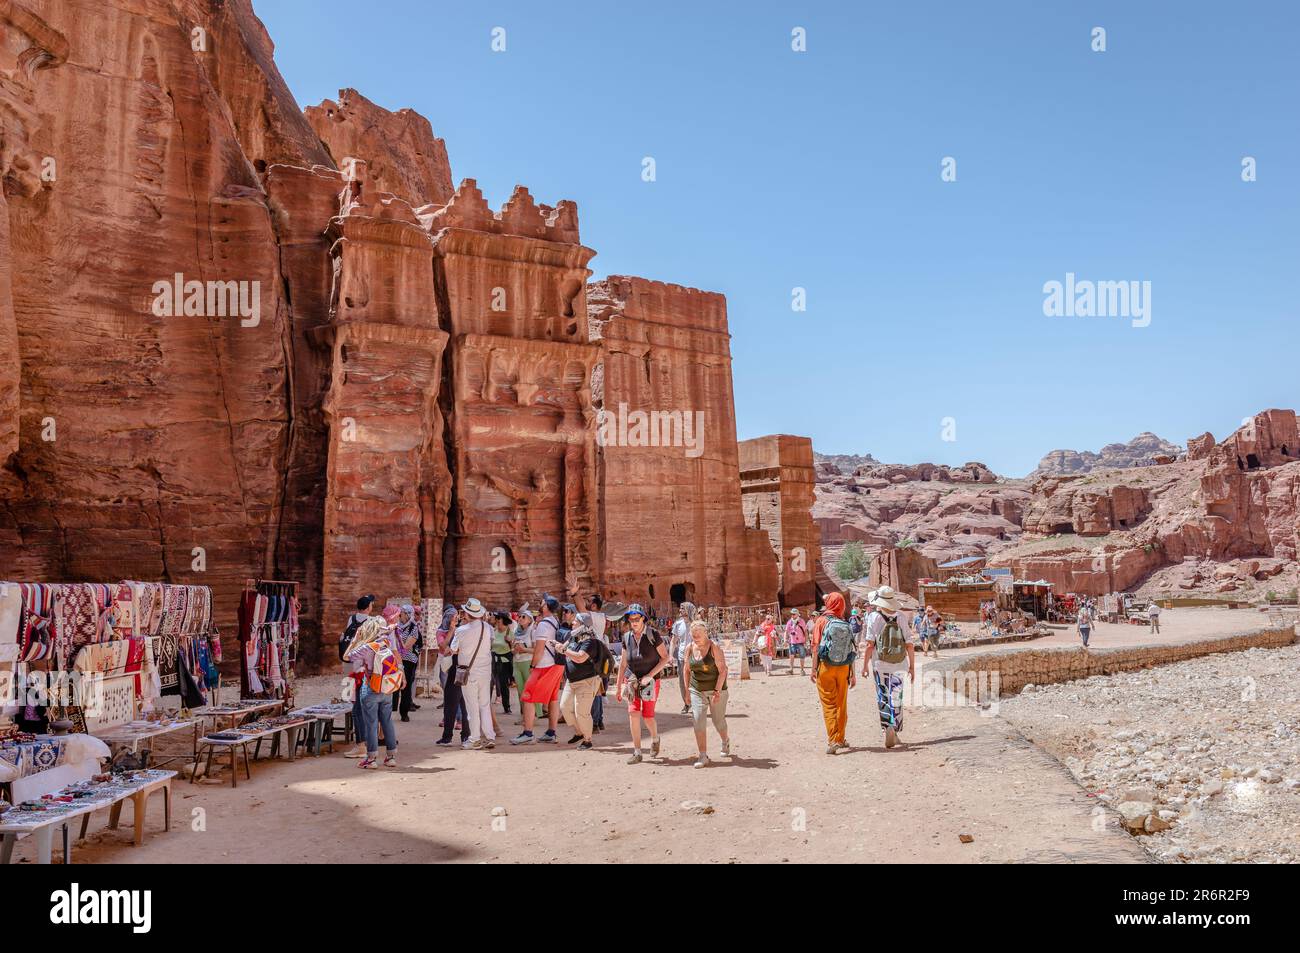 View of the Street of Facades, the row of monumental Nabataean tombs carved in the southern cliff face in Petra, Jordan Stock Photo